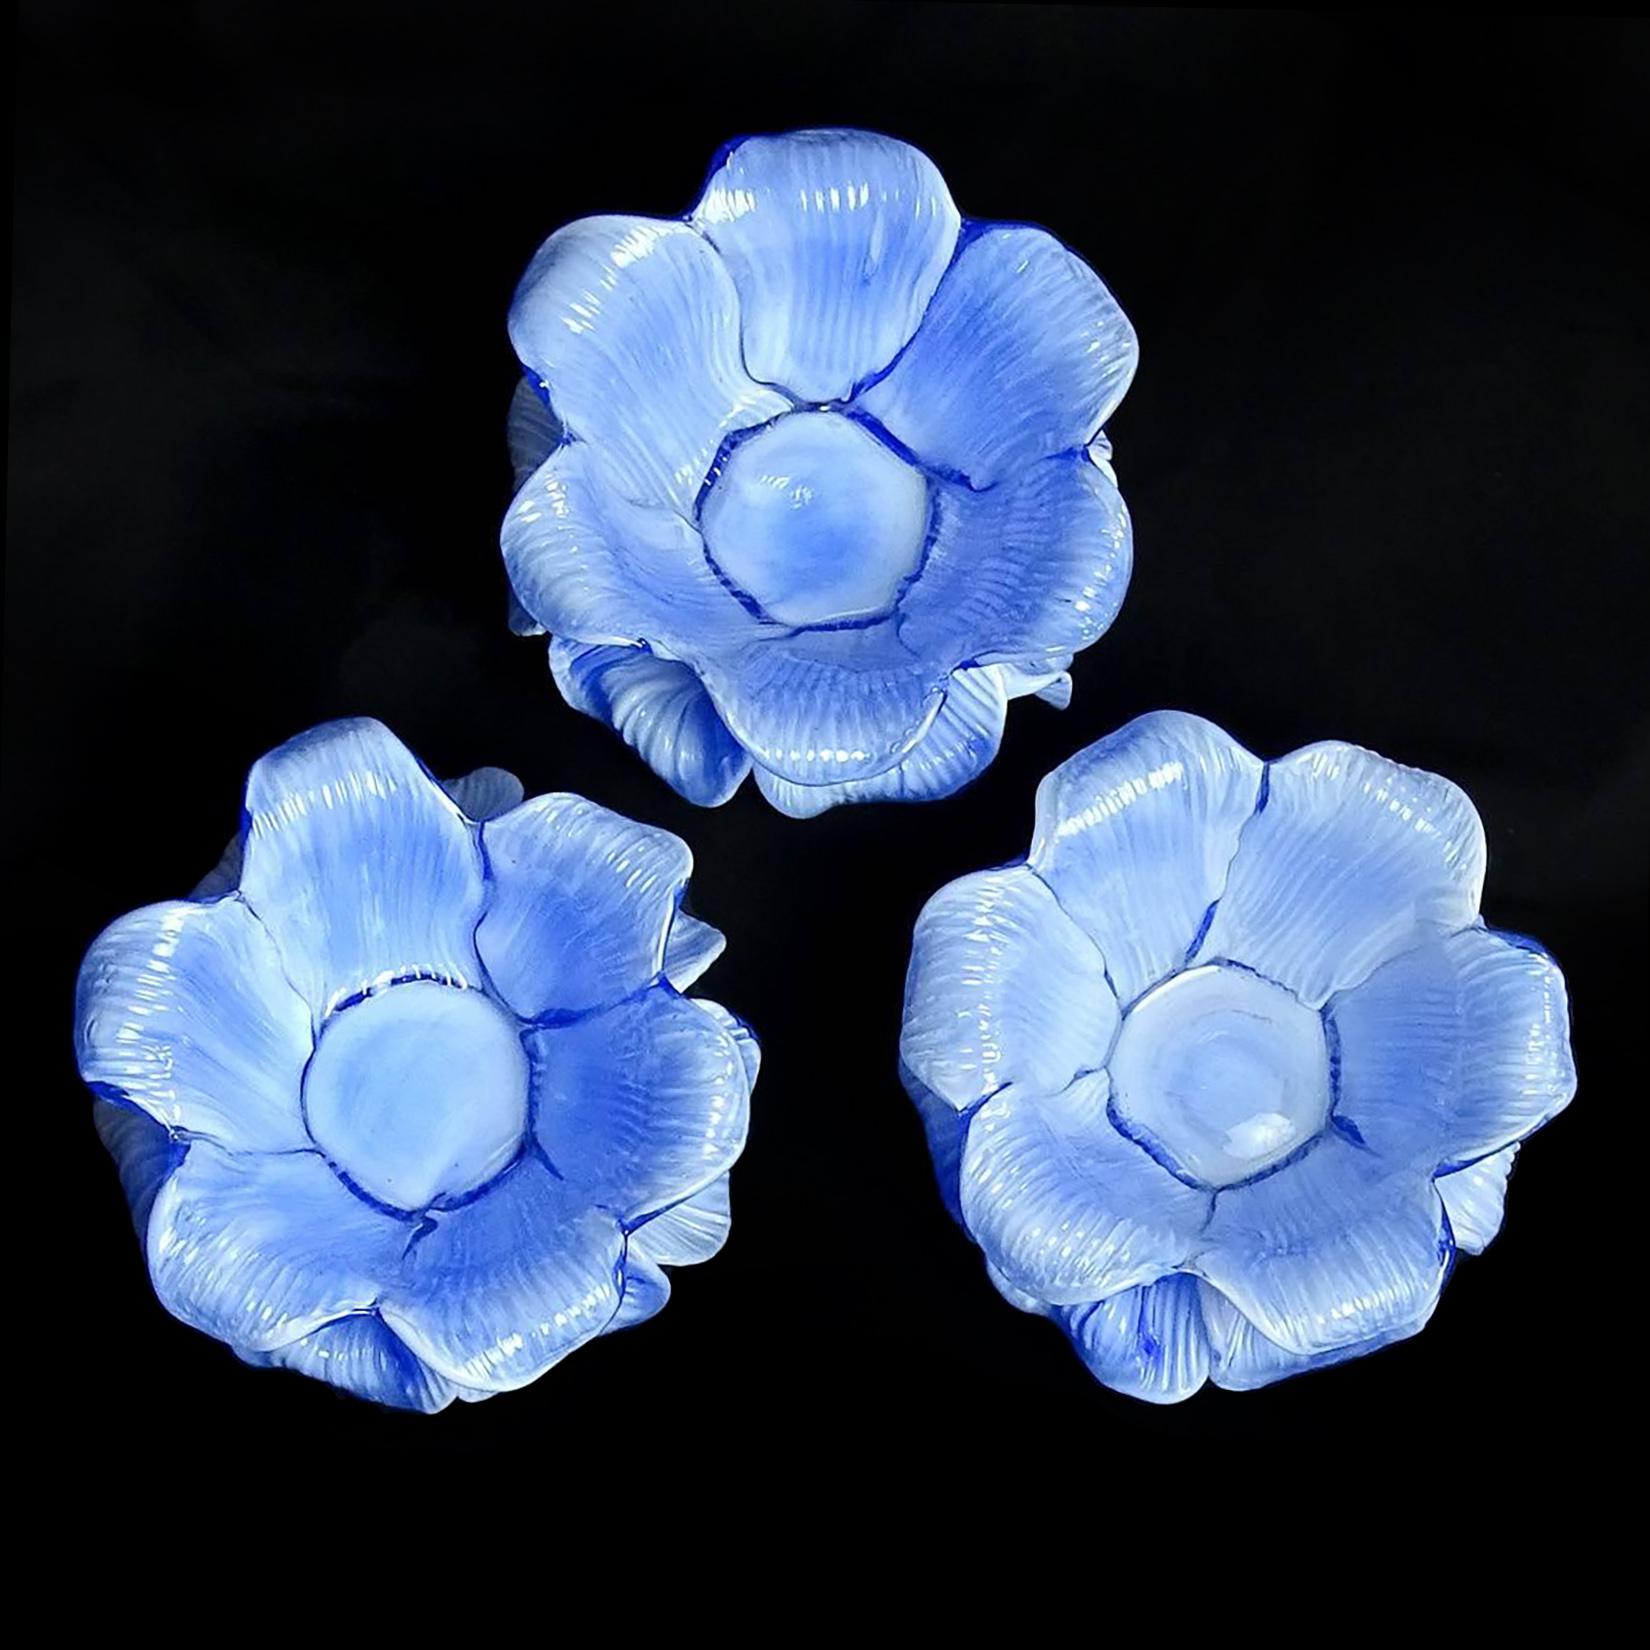 Gorgeous set of 3 Murano hand blown, blue and white double petal Italian art glass flower bowls / candleholders. Attributed to the Fratelli Toso Company, circa 1950s, all with original labels underneath. They have a glass disk on the bottom, and